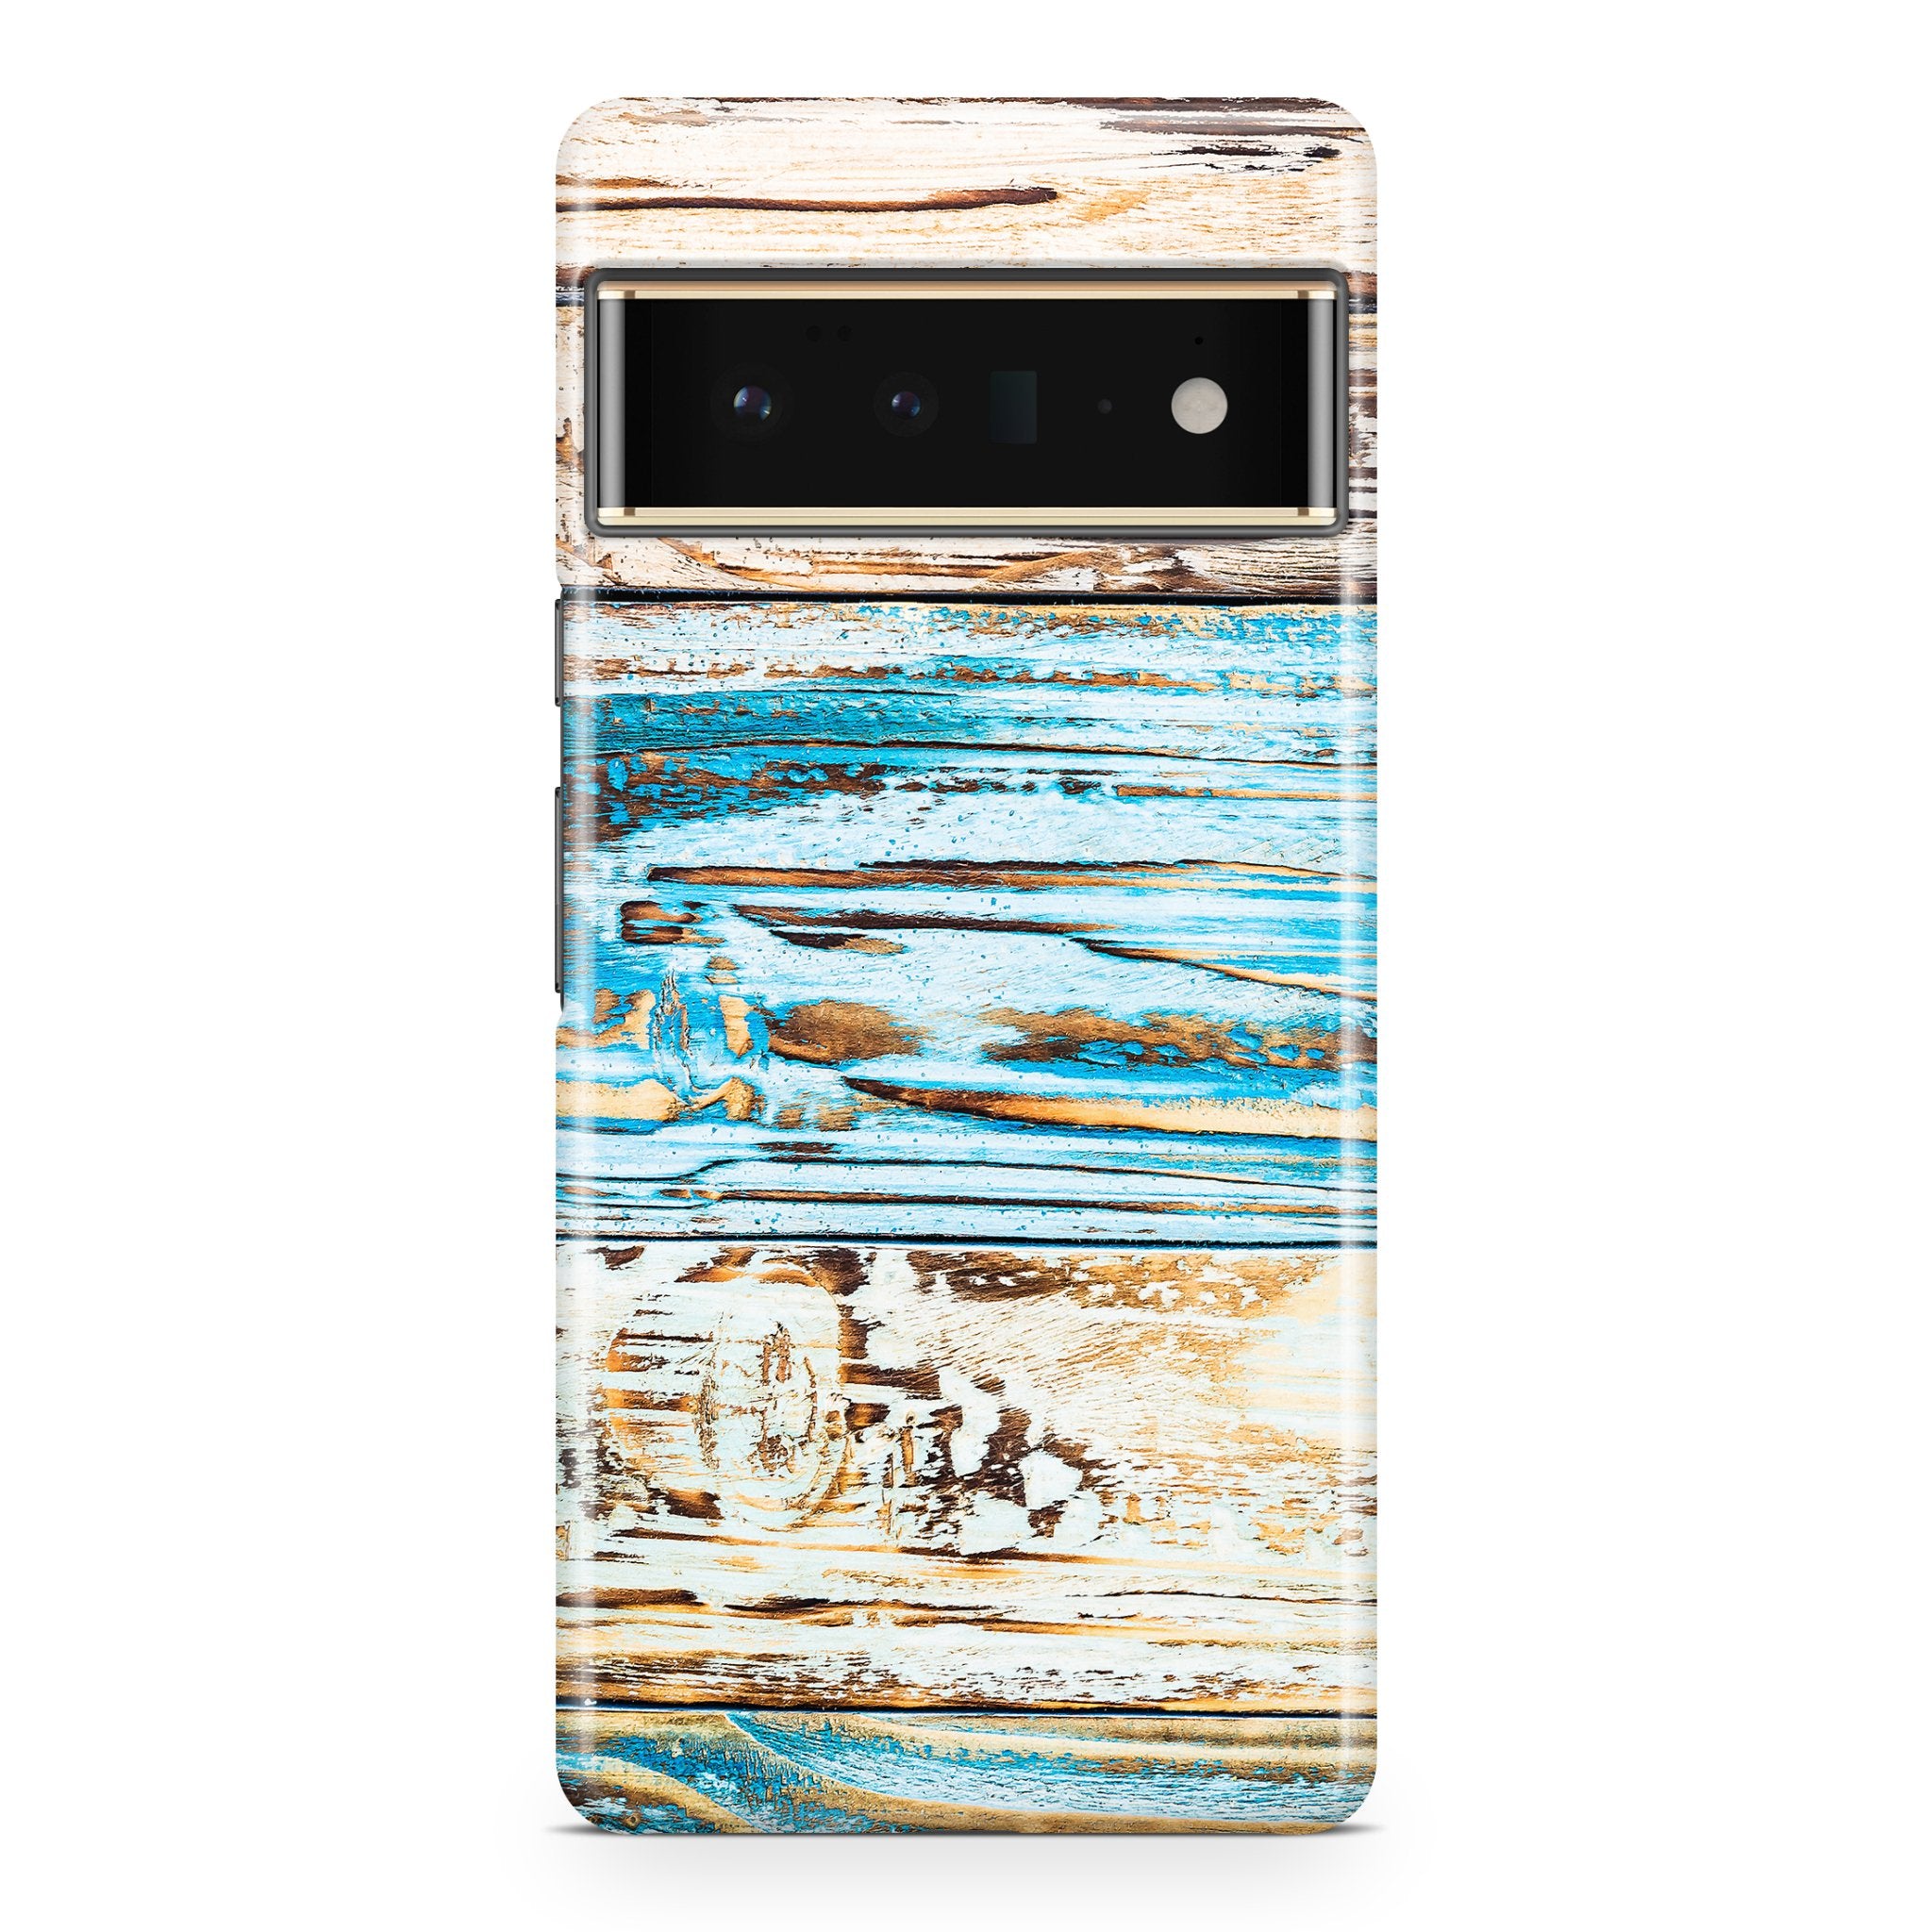 Scrapped Bluewash - Google phone case designs by CaseSwagger